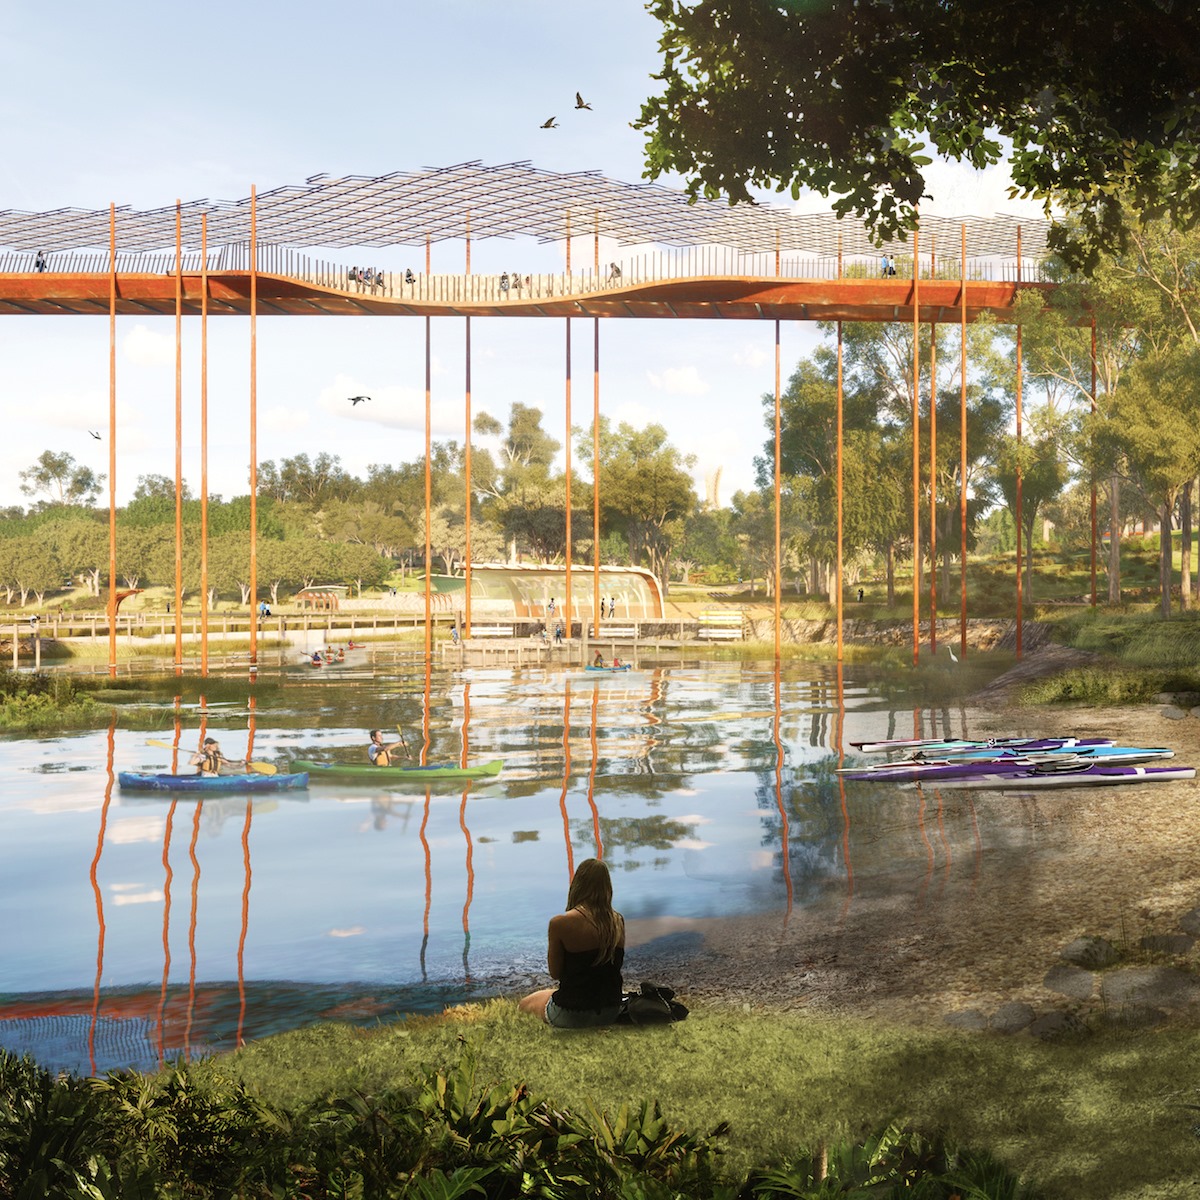 render of a lagoon area in the park